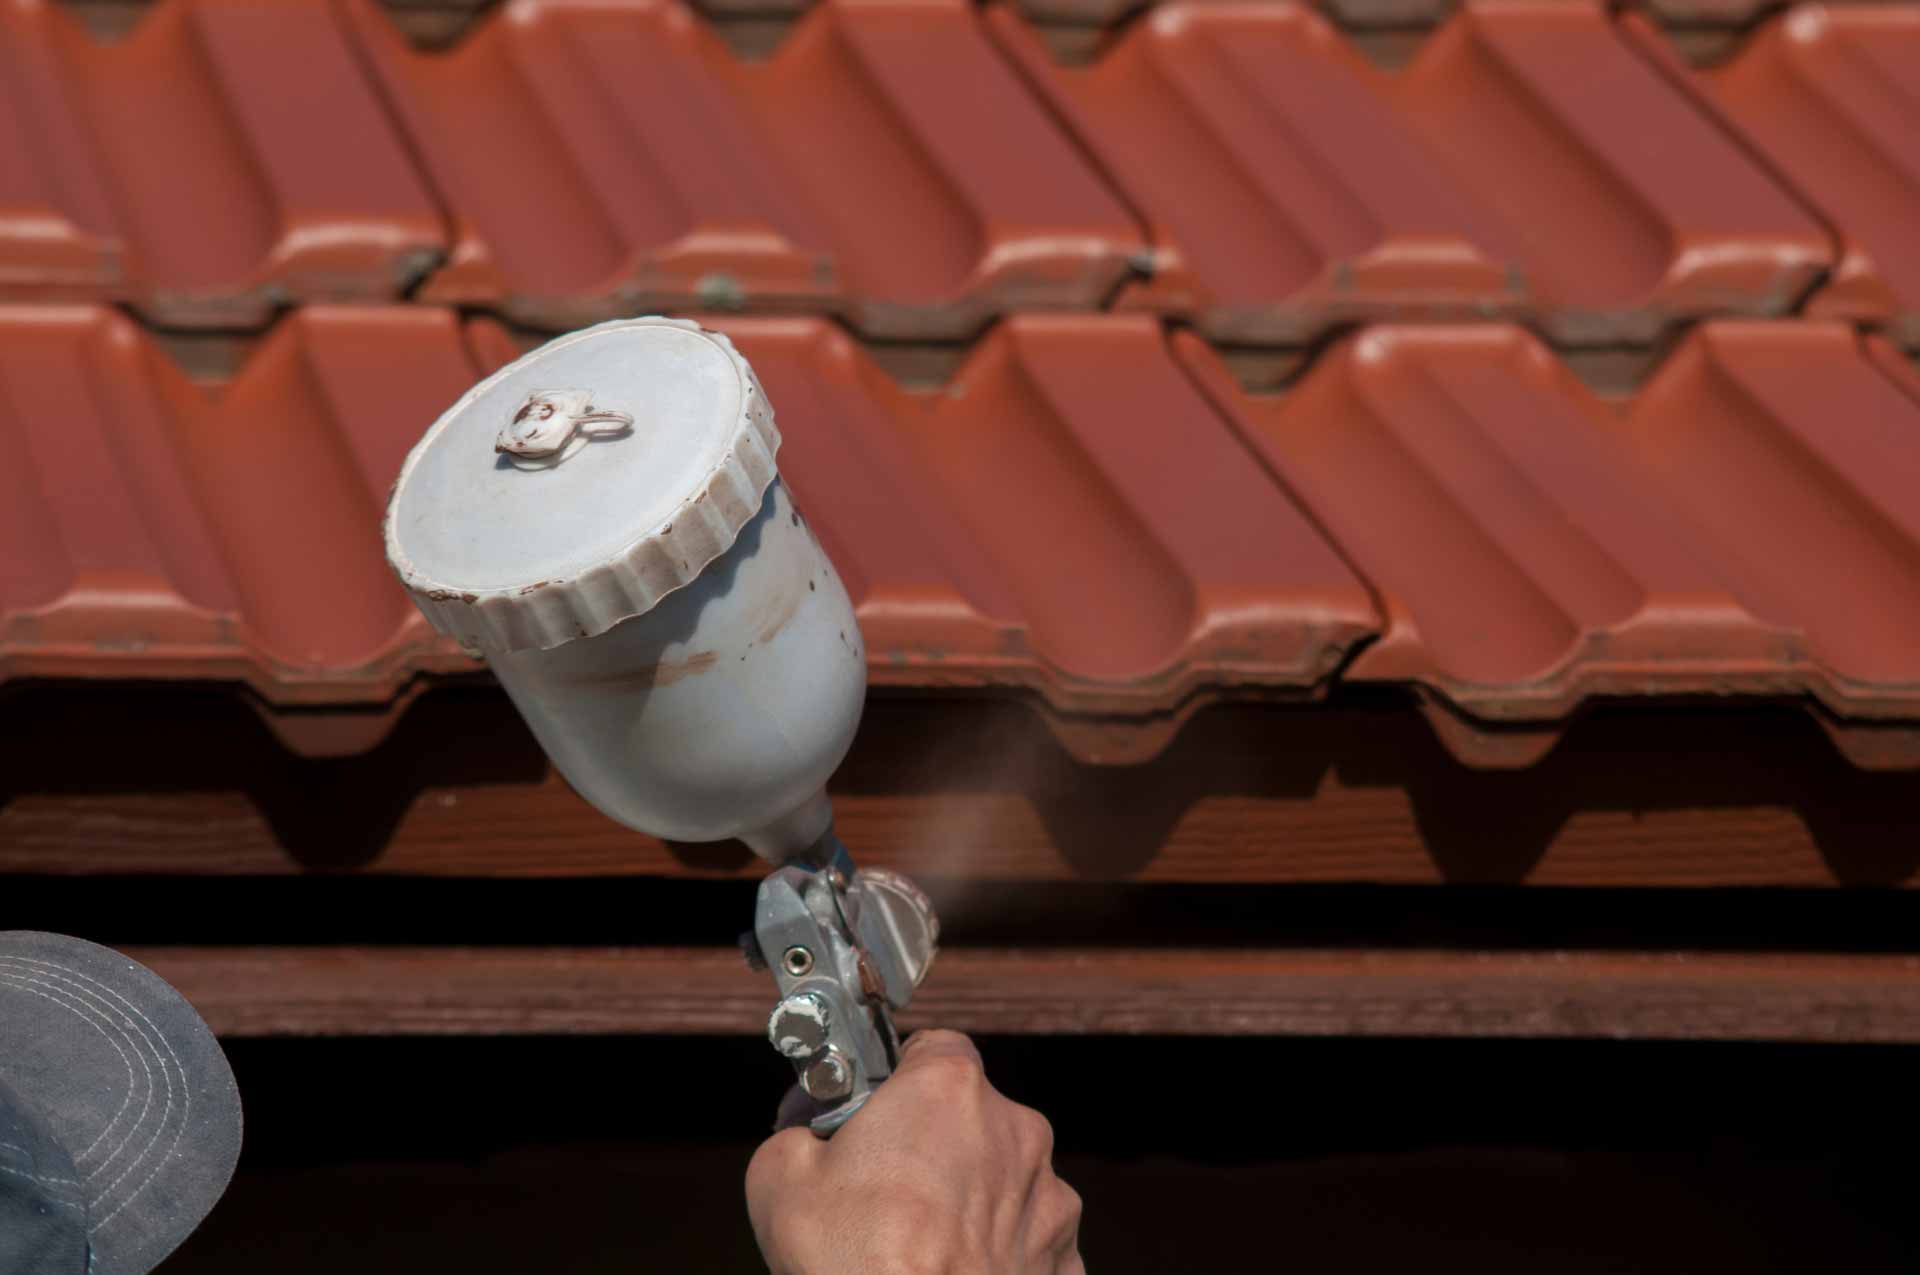 Close-up on airbrush used for painting clay tile roof